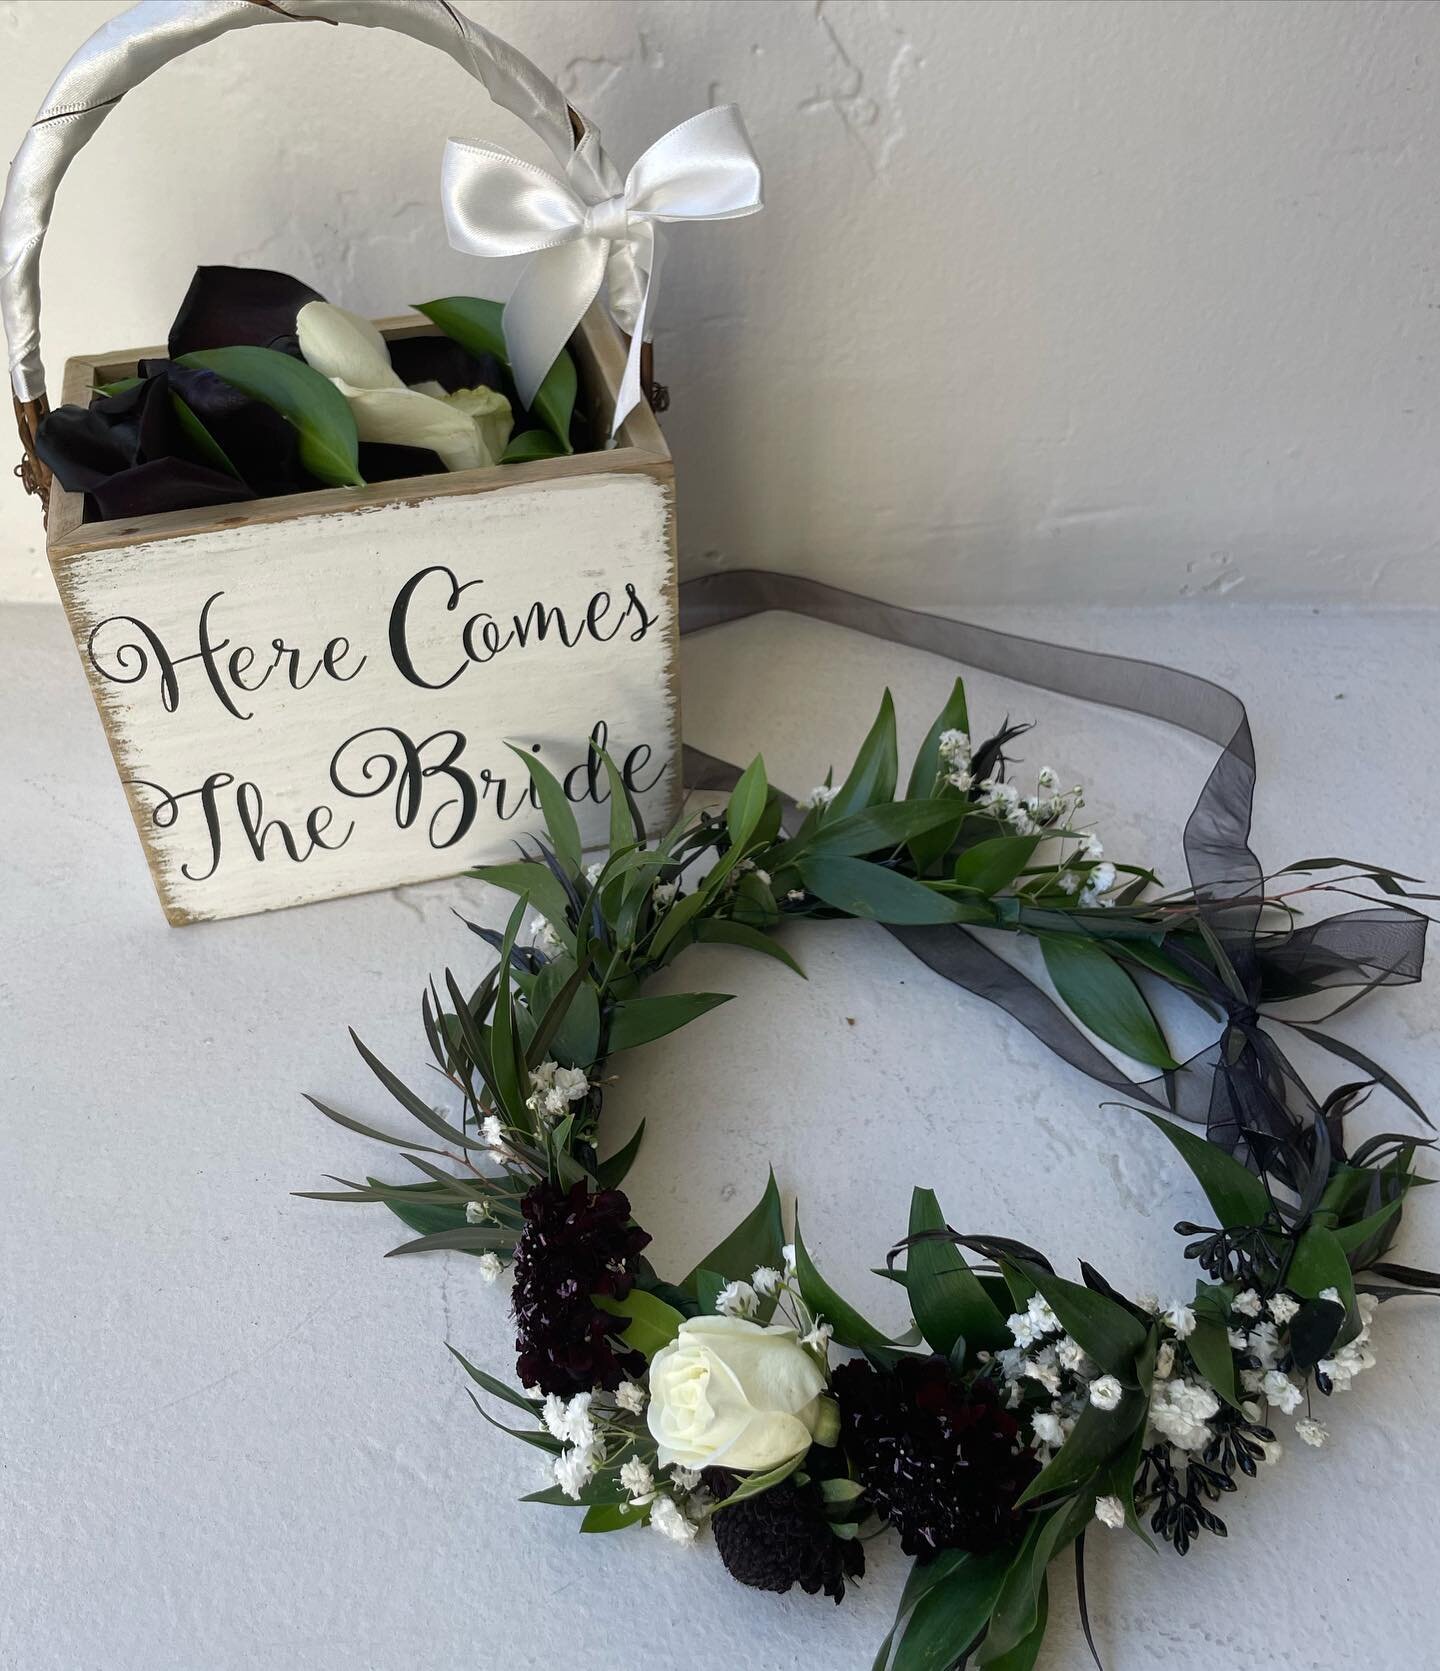 Black roses for a wedding?! We love being challenged to go outside the box!
This black and green wedding came out so uniquely beautiful 🖤